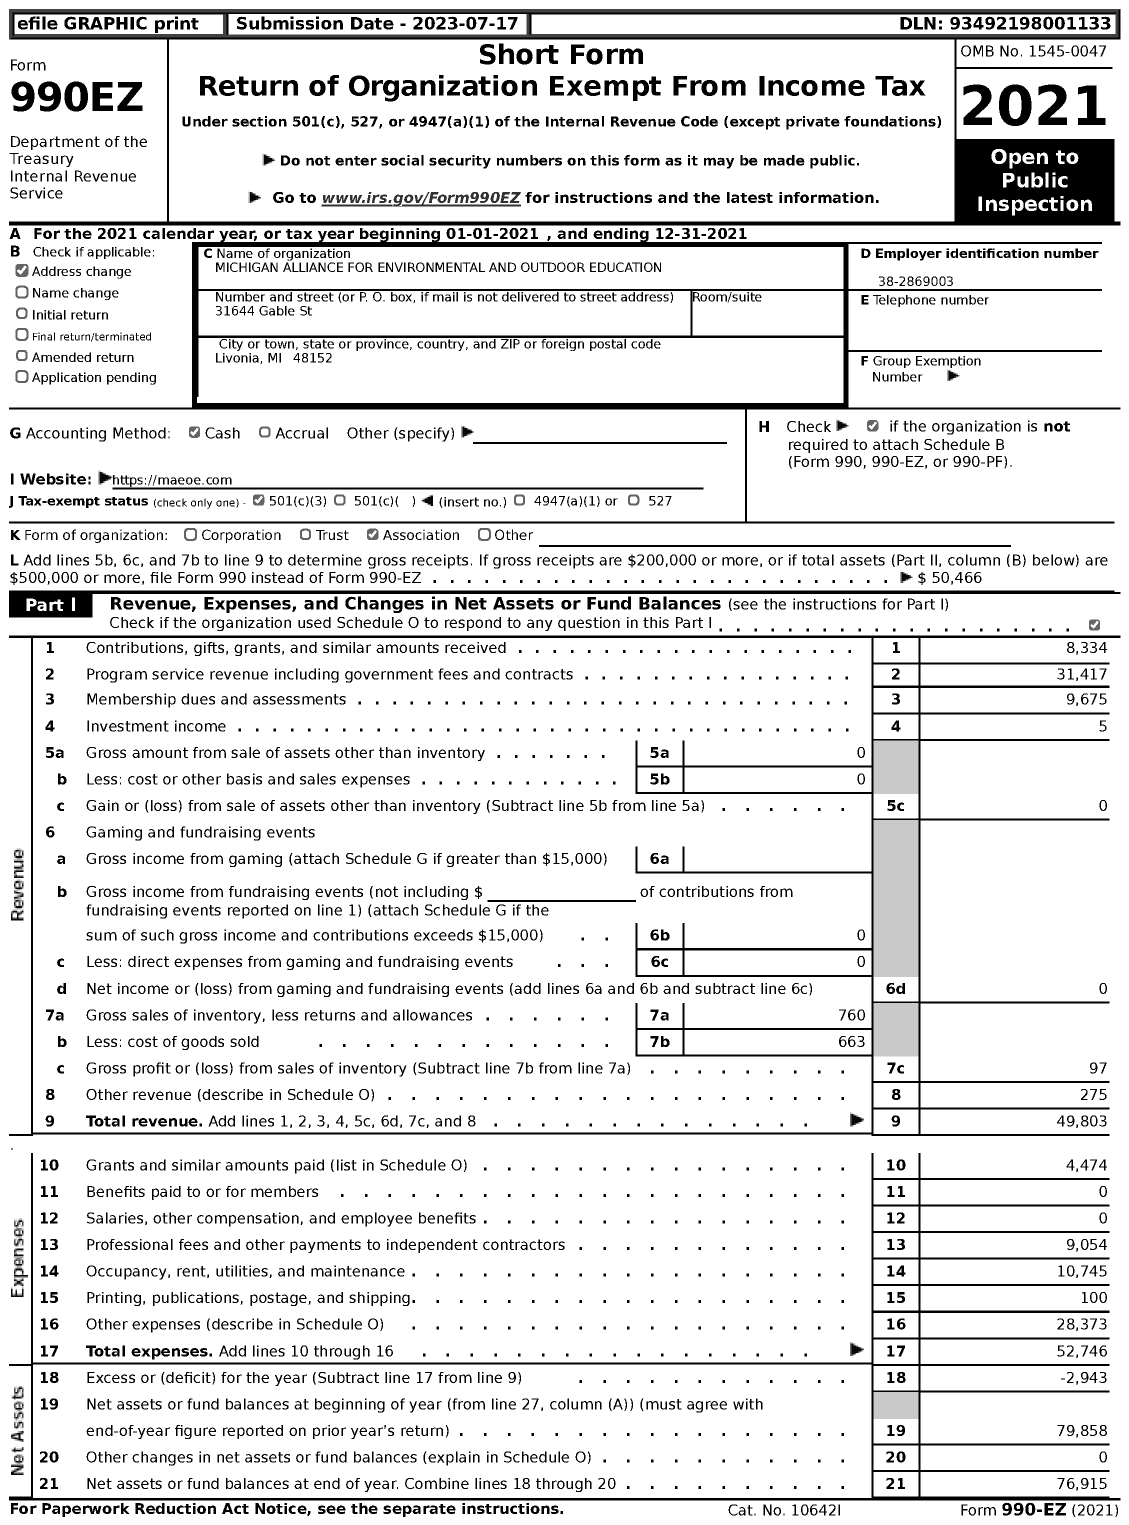 Image of first page of 2021 Form 990EZ for Michigan Alliance for Environmental and Outdoor Education